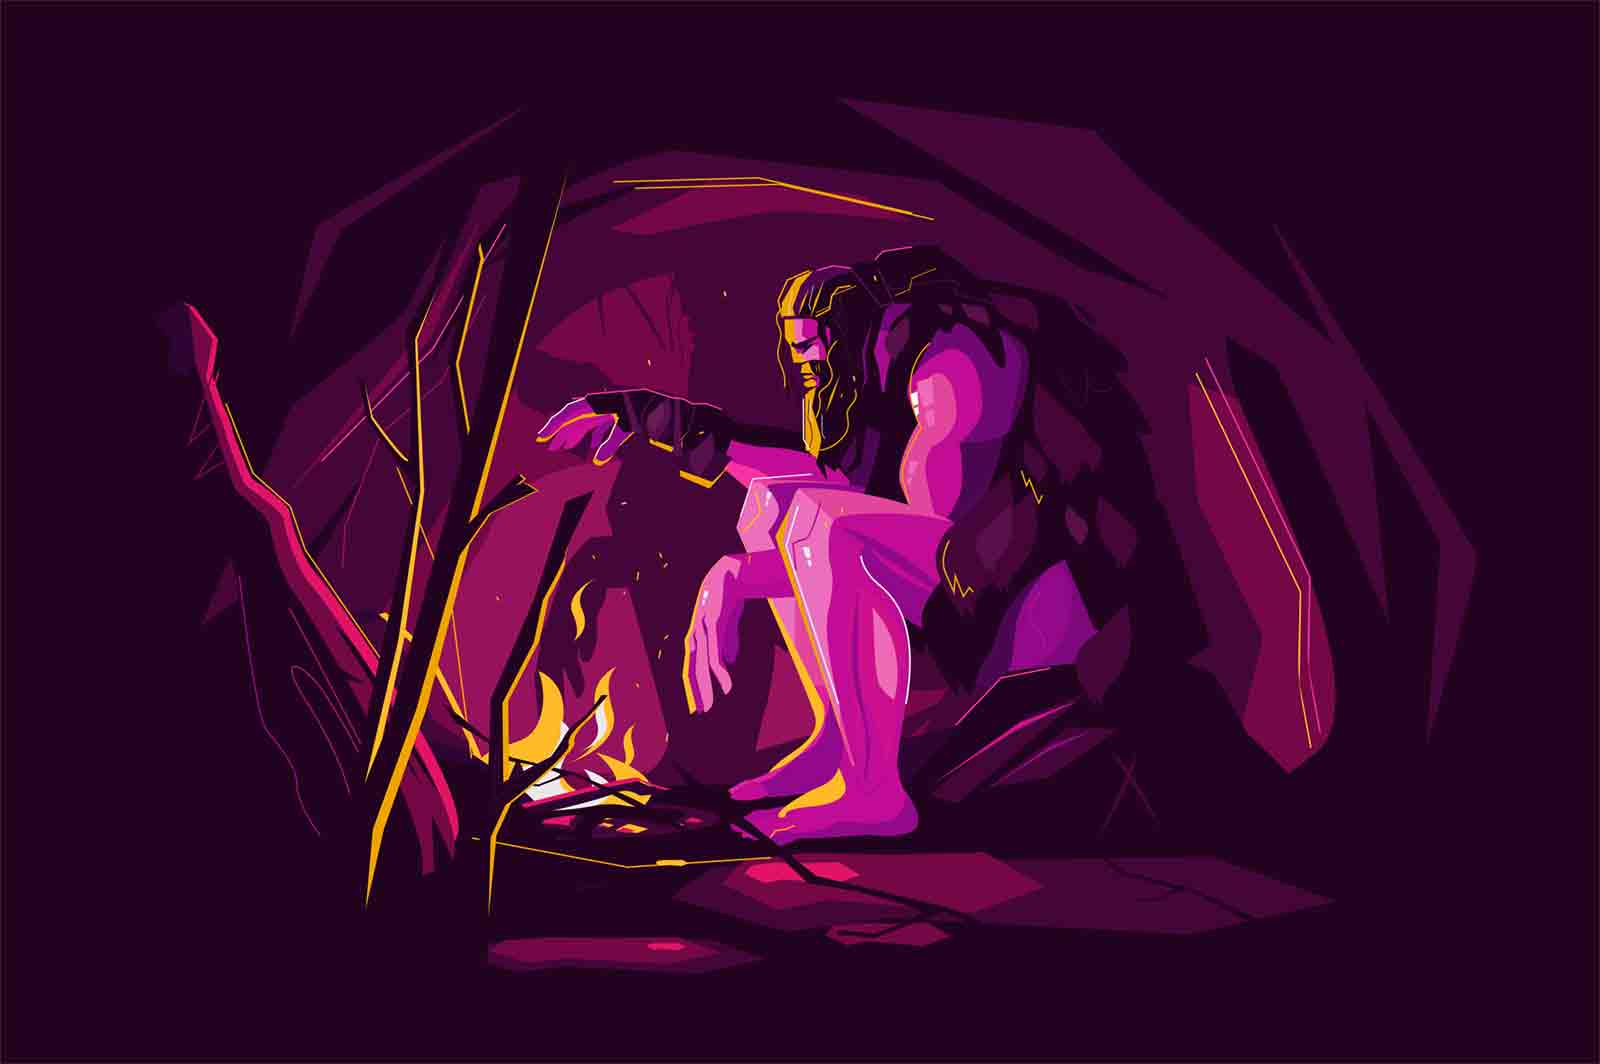 Wild caveman sitting near bonfire vector illustration. Tired and exhausted prehistoric boy relaxing near protective light flat style design. Ancient ages concept